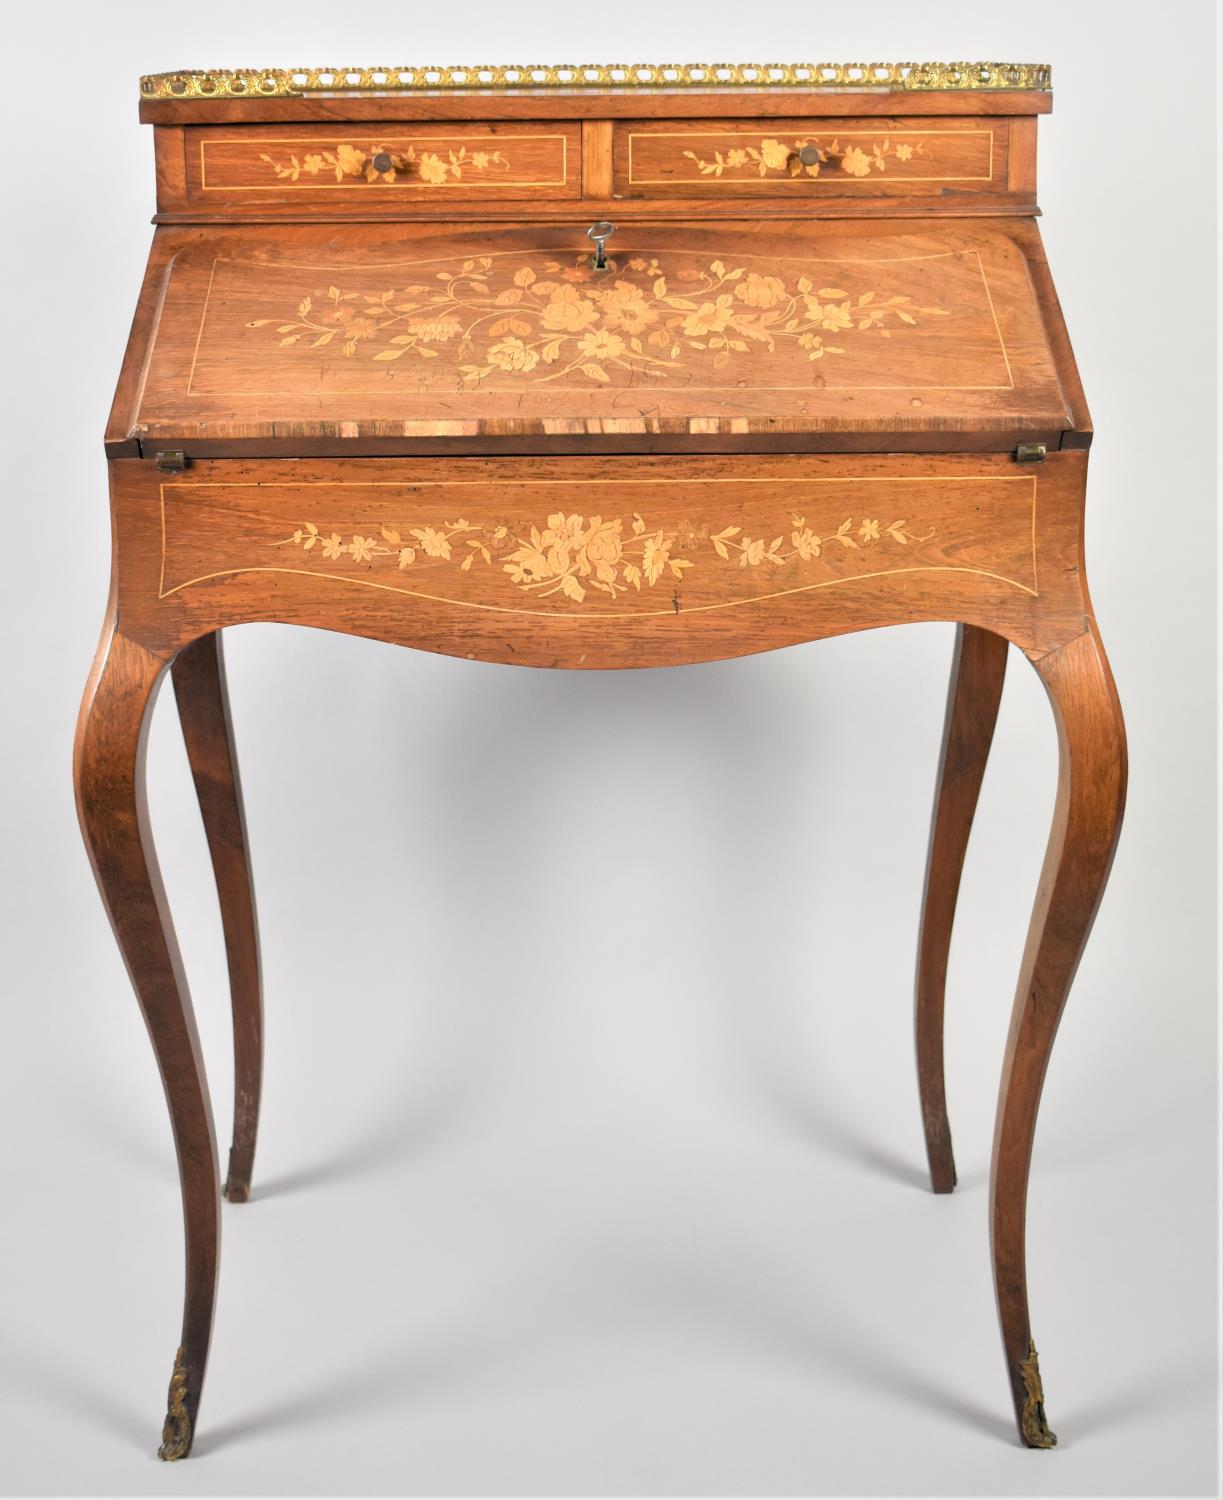 A Reproduction Ormolu Mounted French Style Inlaid Walnut Ladies Writing Bureau on Extended